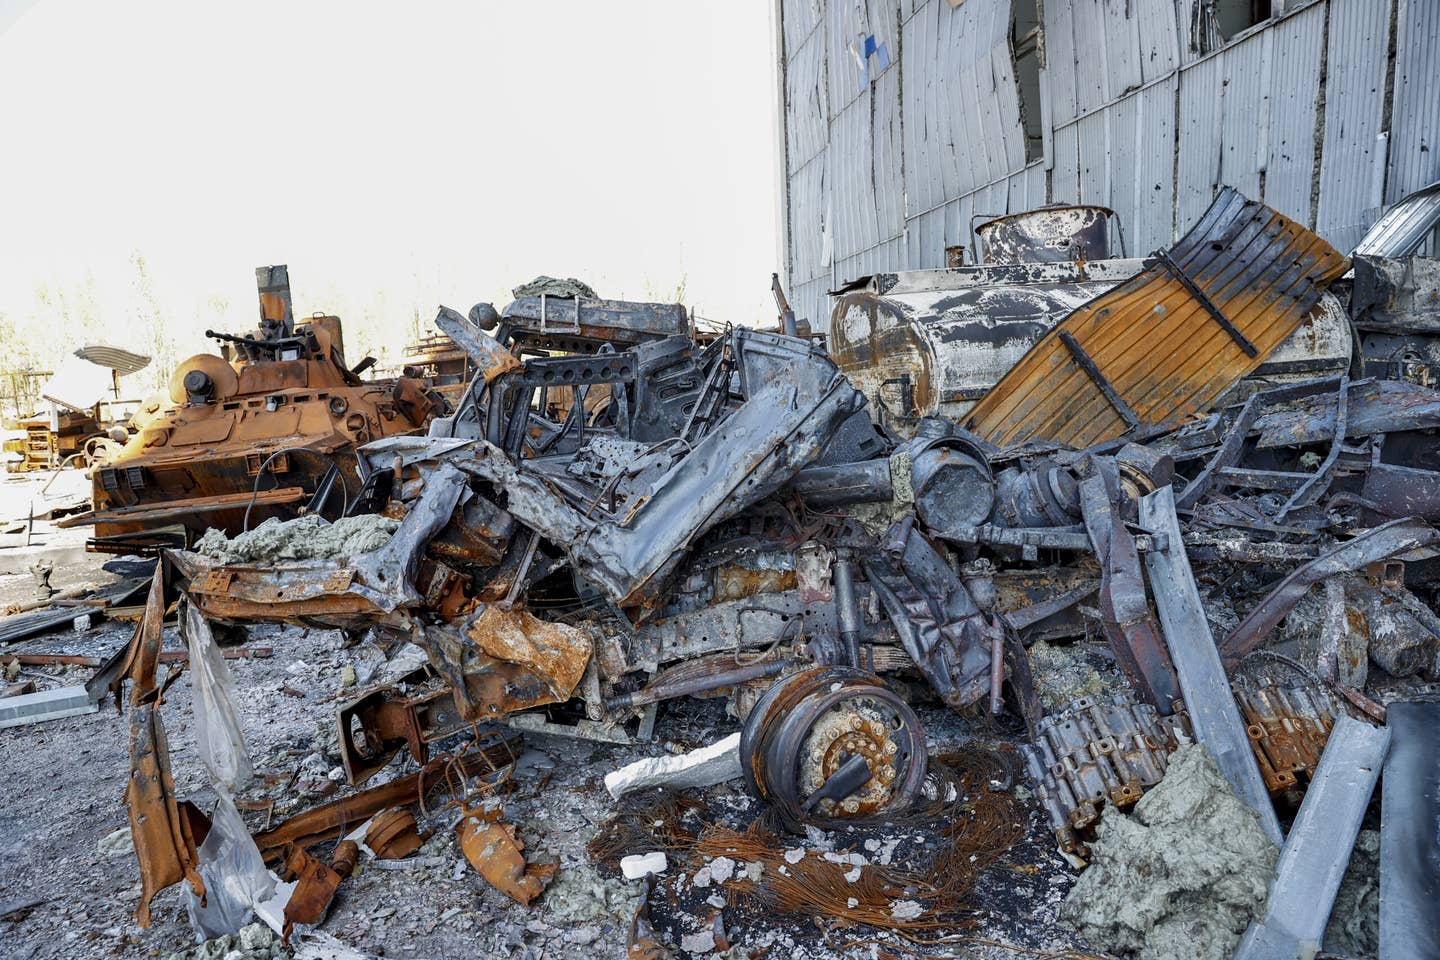 A view of the wreckage of the military vehicles, at a hangar after it was destroyed by Russia's attacks on Antonov Airport in Hostomel, Ukraine on May 5, 2022. <em>Dogukan Keskinkilic/Anadolu Agency via Getty Images</em>